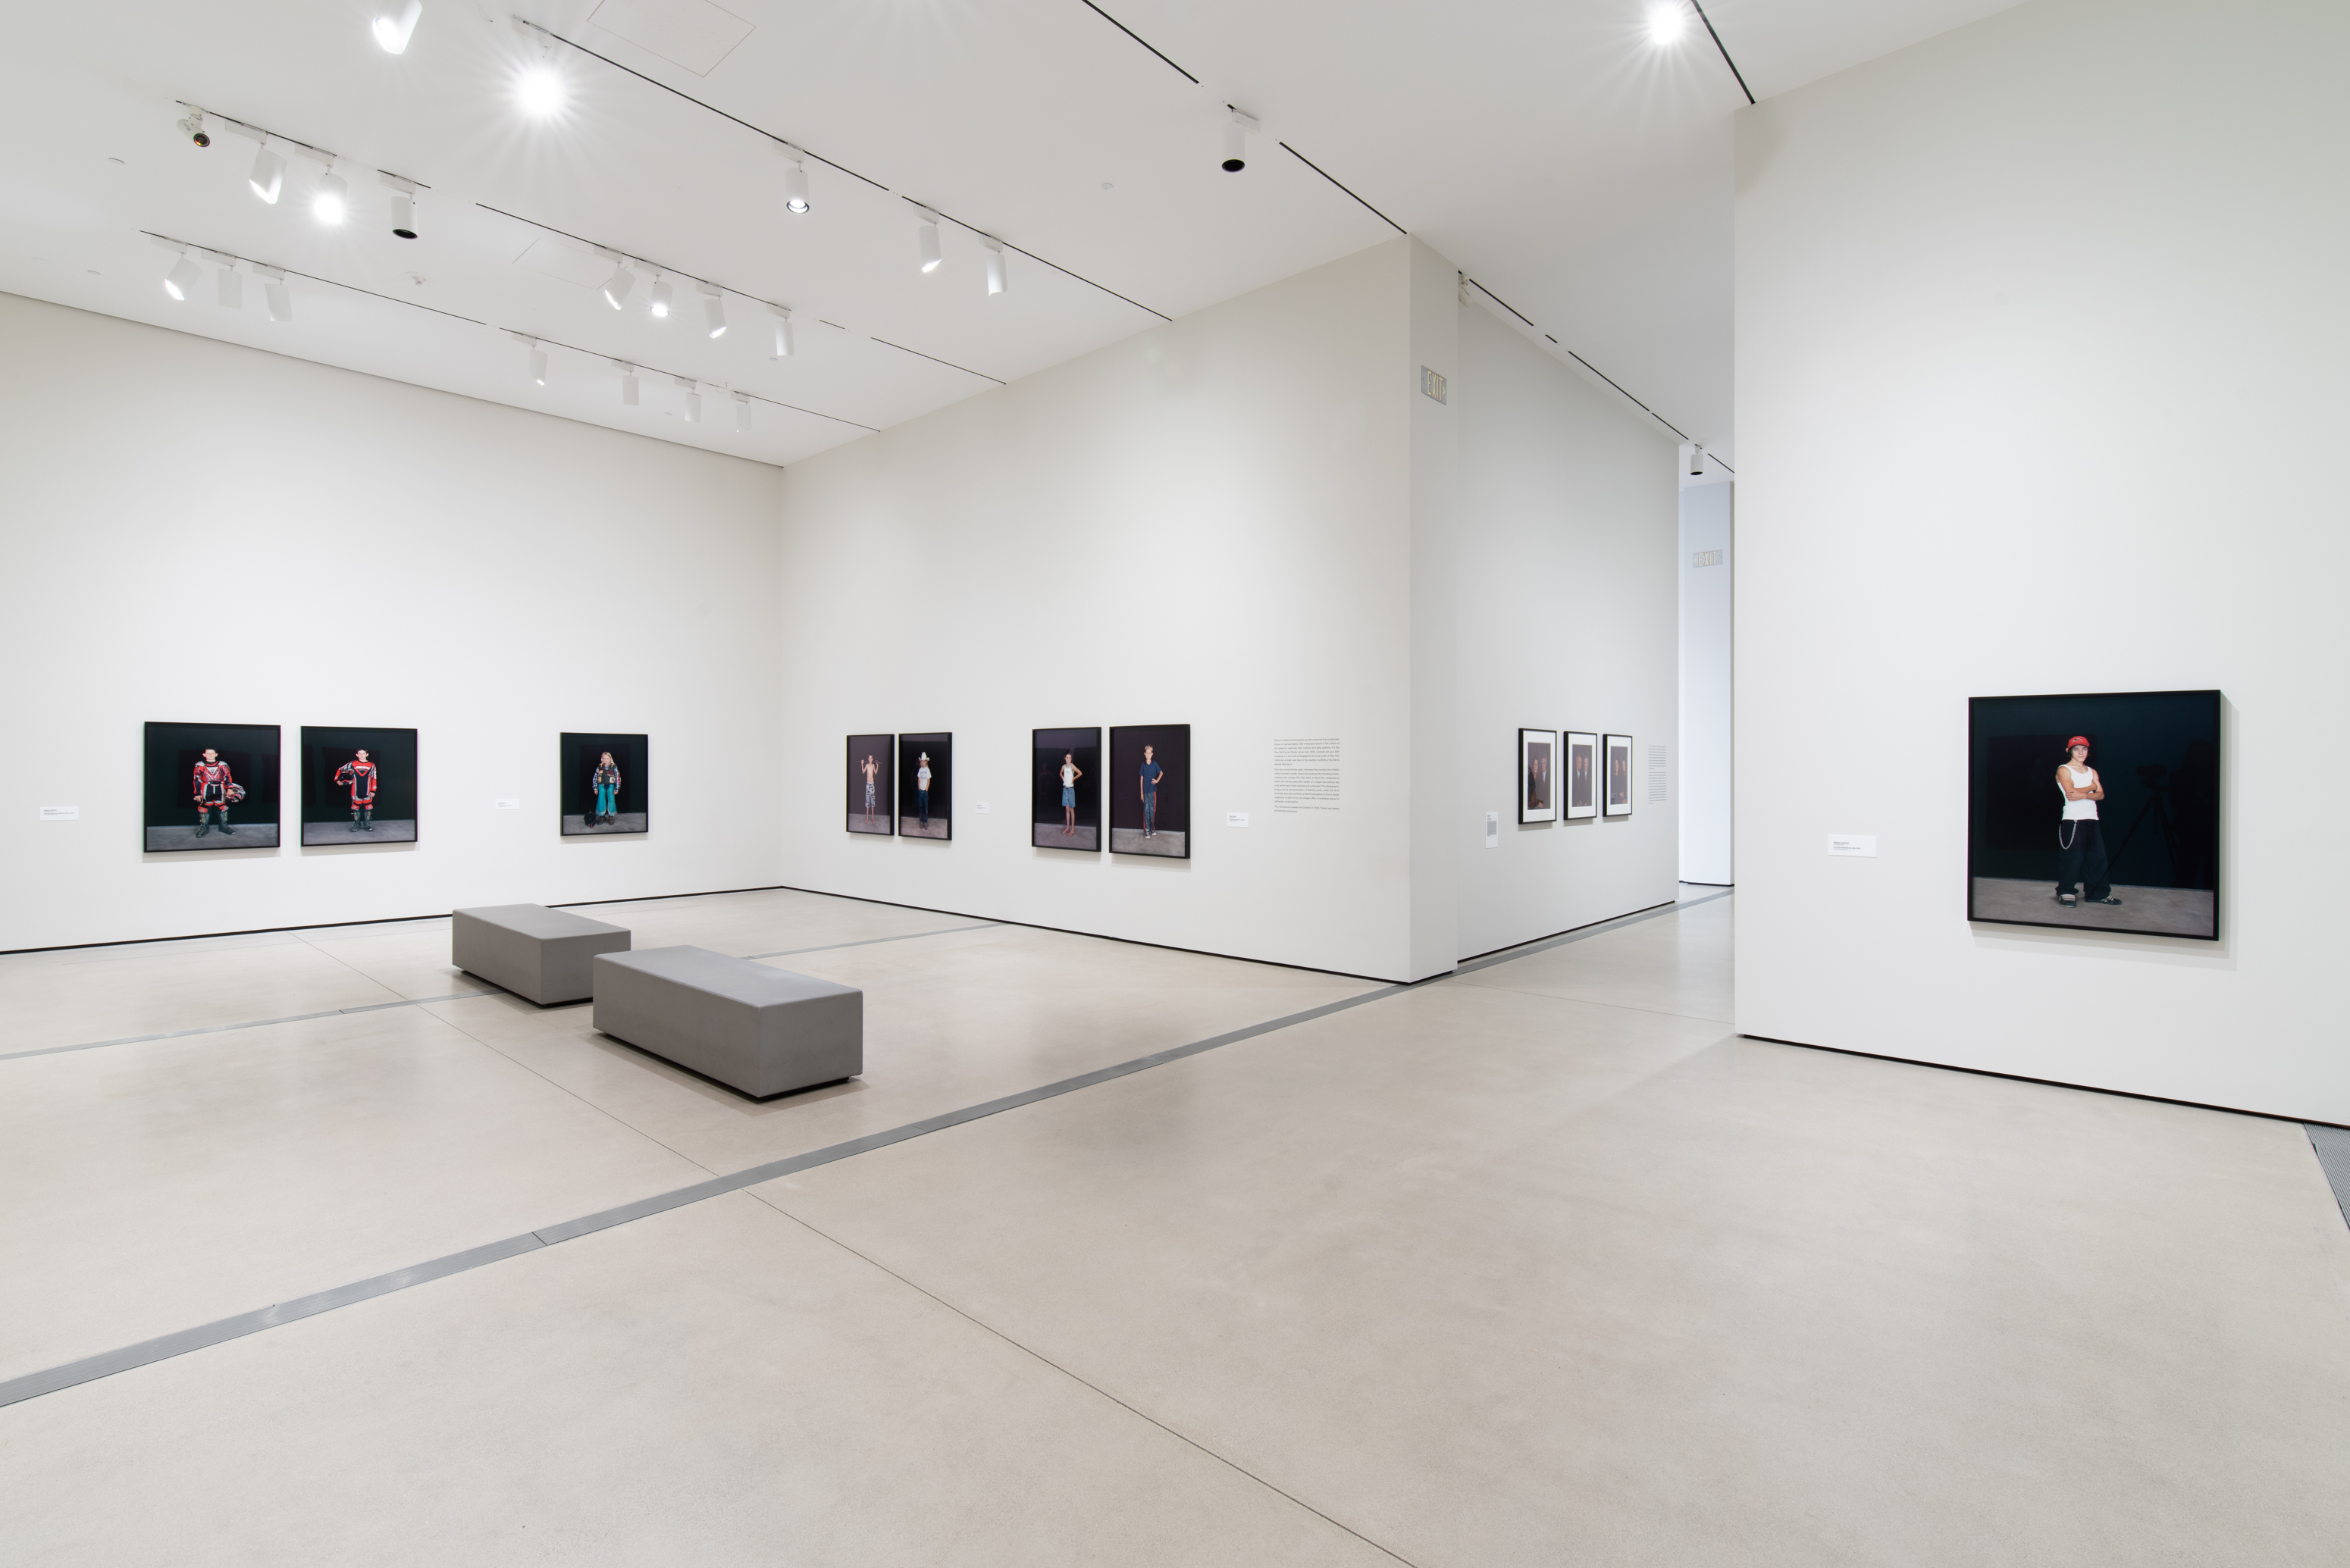 Installation view courtesy of the Broad